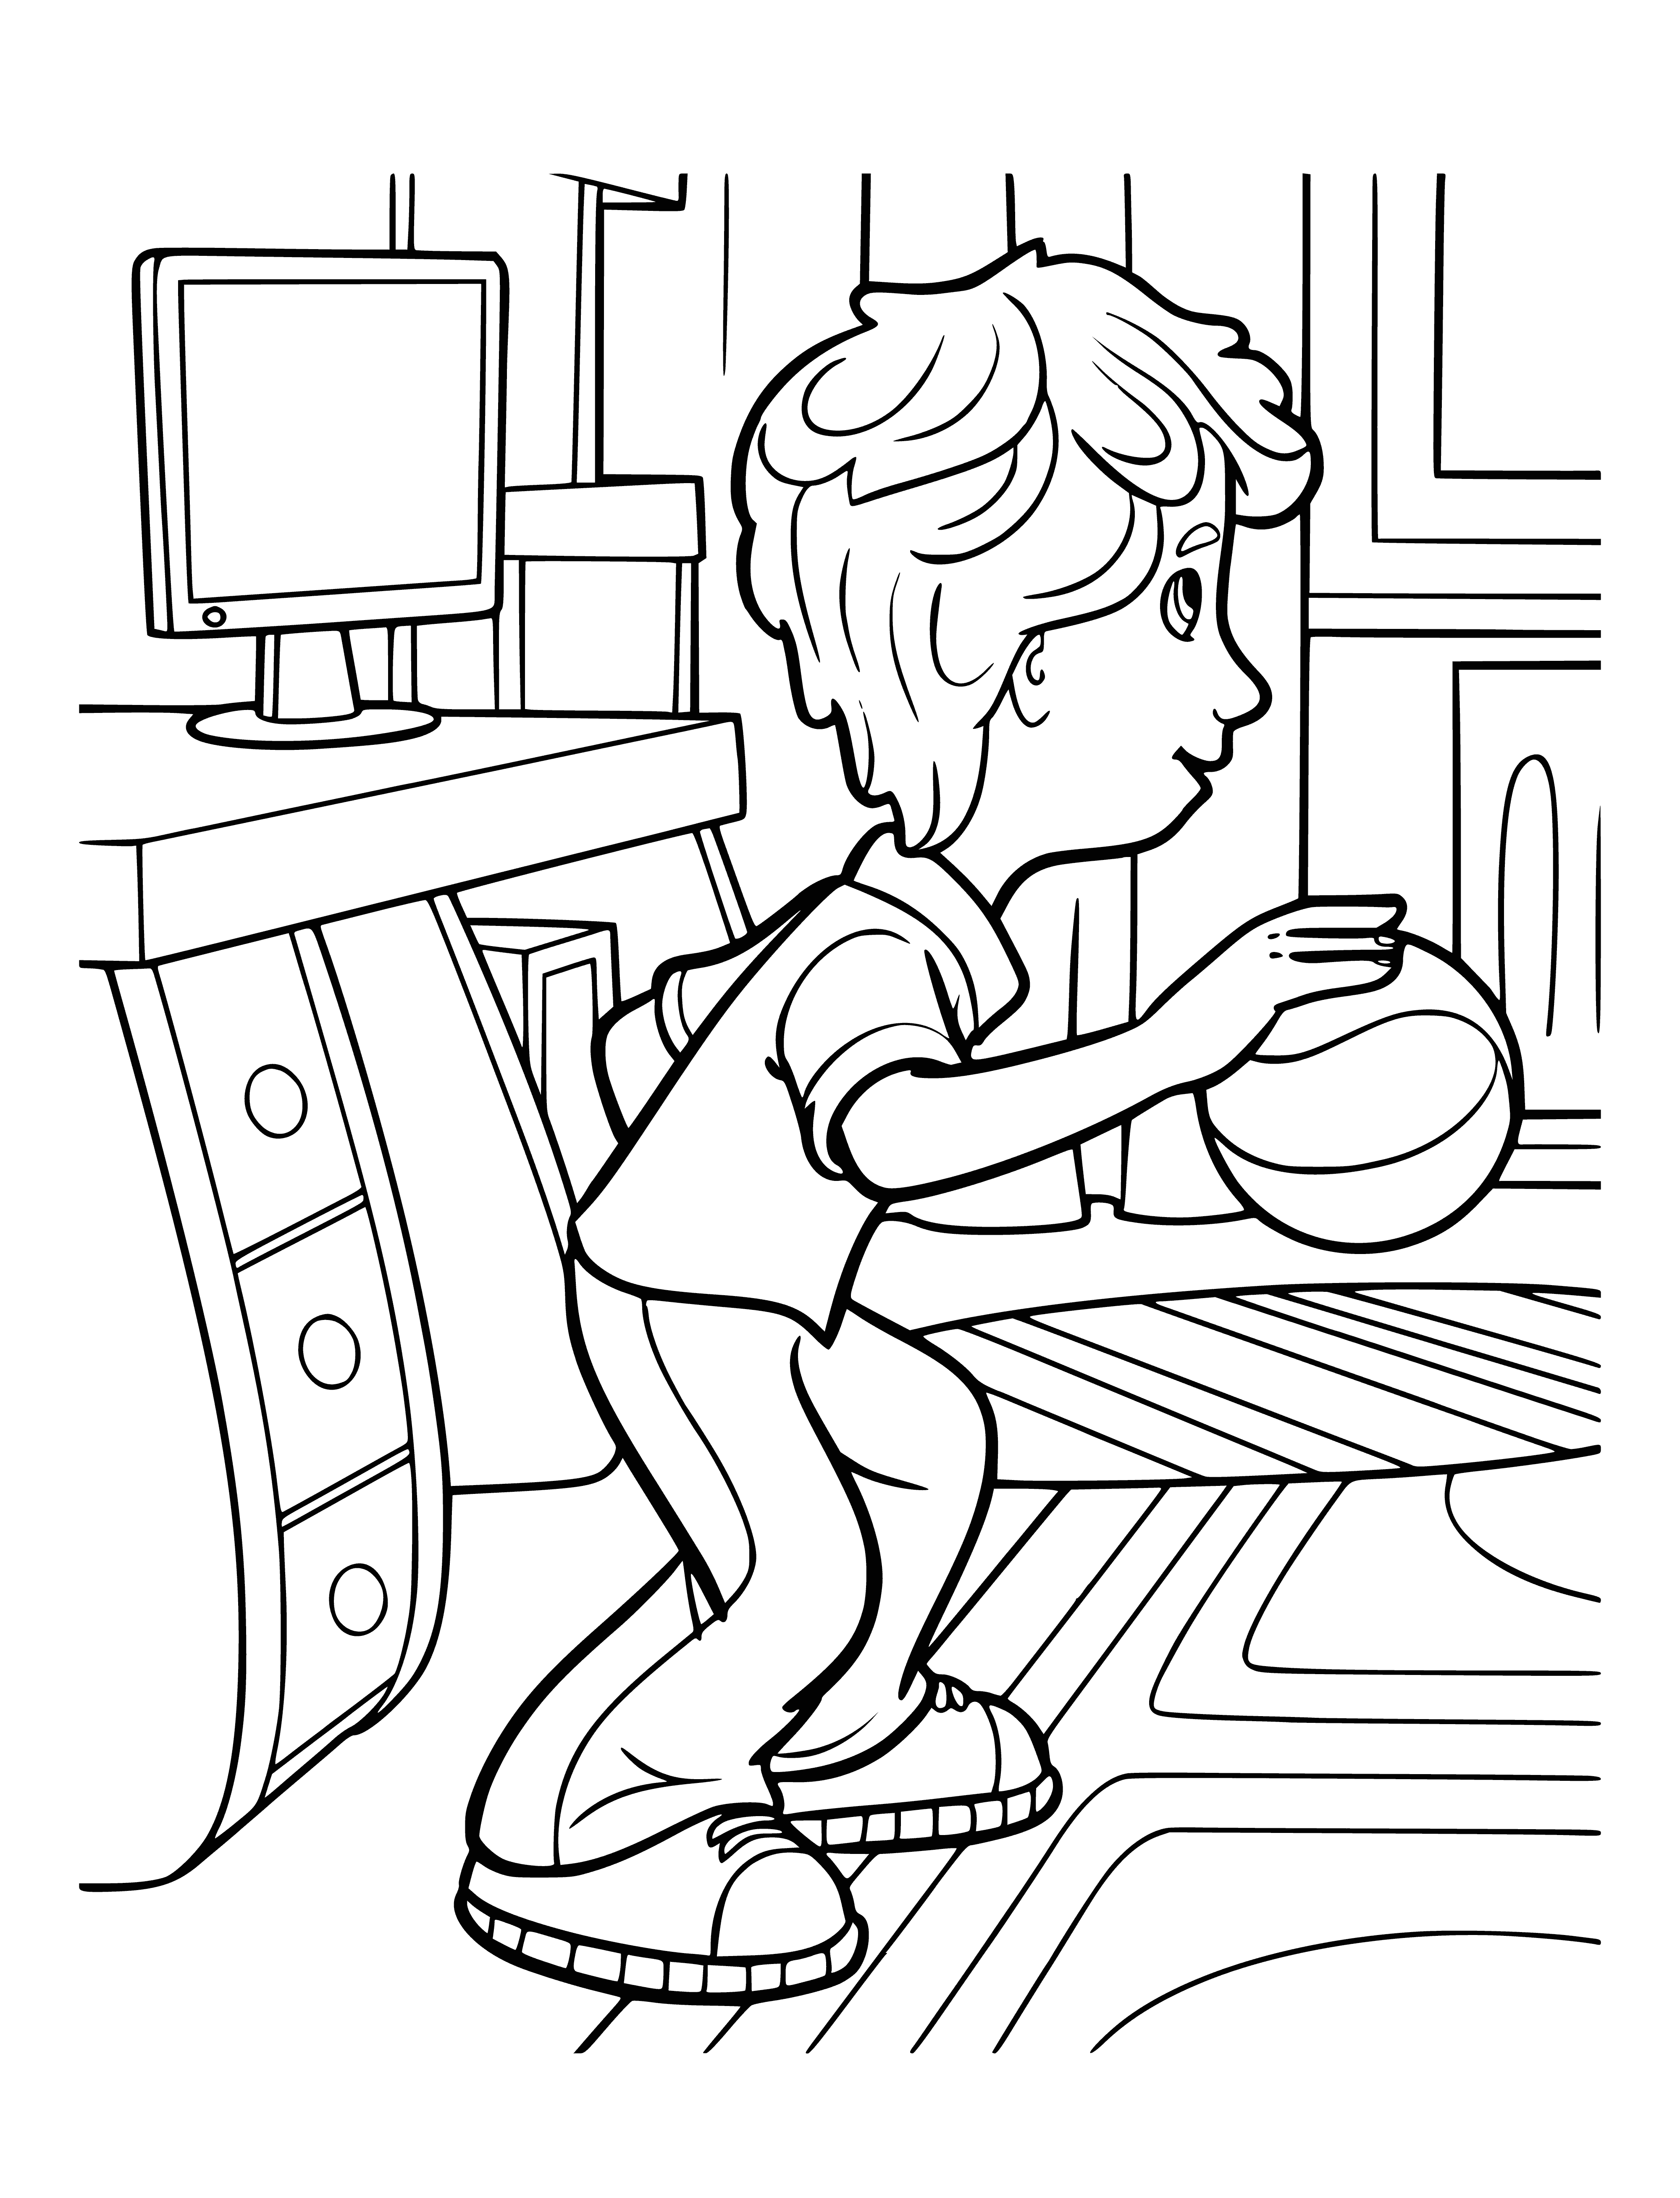 coloring page: Robot Fixie Dim Dimych has a black body, white face, and a black baseball cap. He's holding a wrench in his right hand.